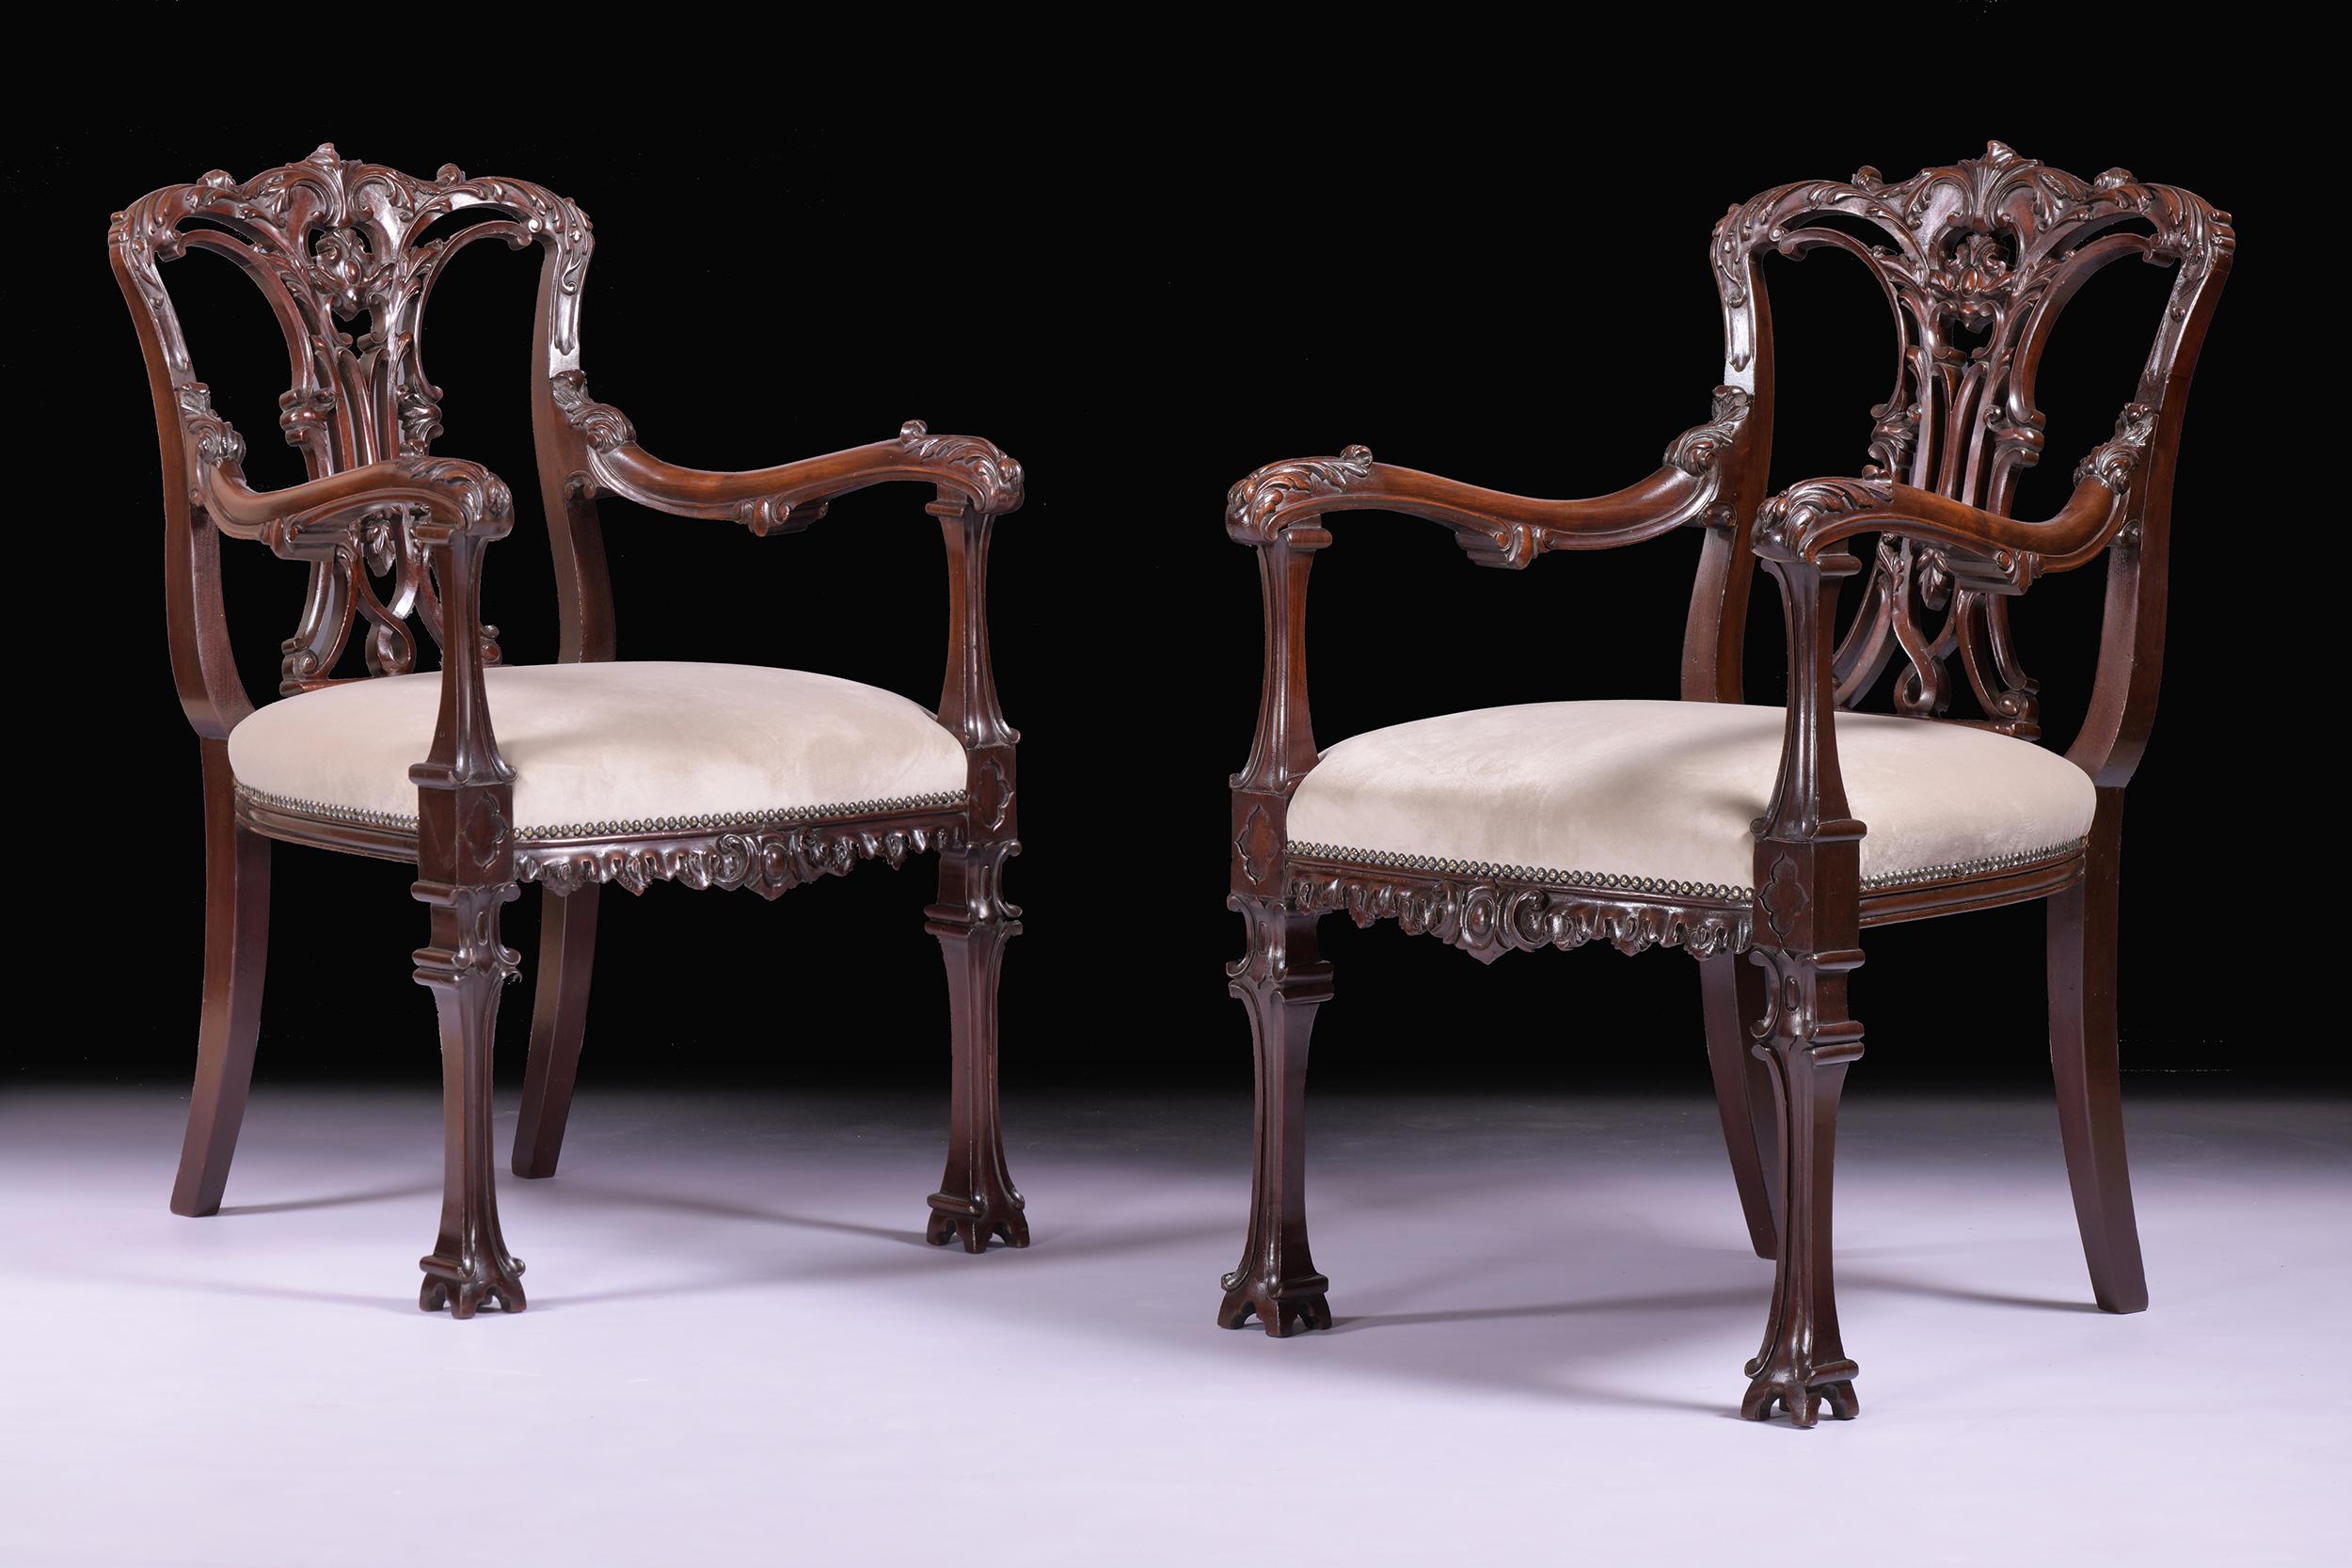 English Pair Of 19th Century Armchairs In The Chinese Chippendale Style